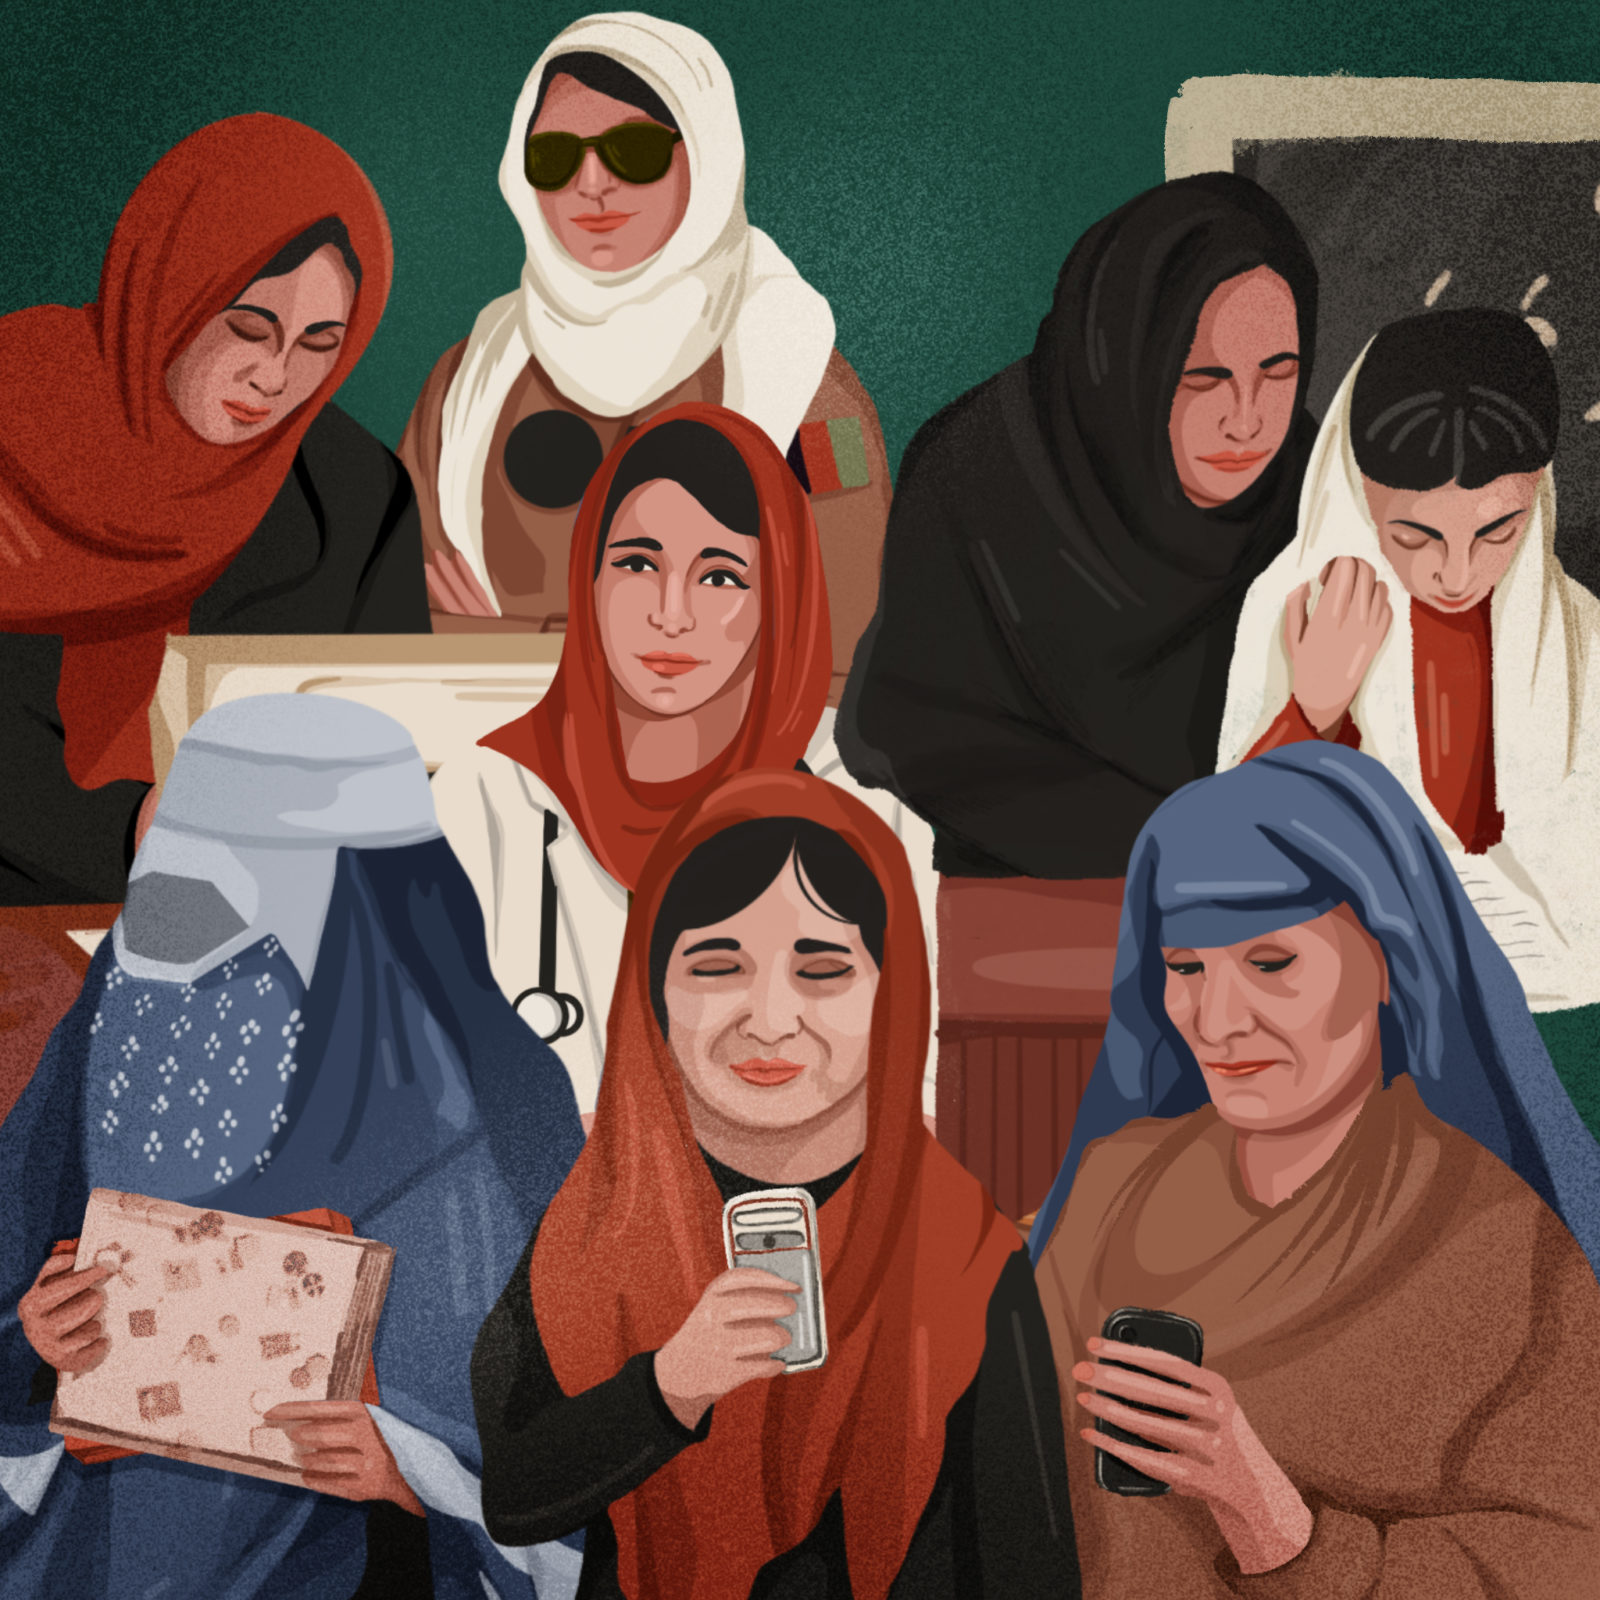 An illustration depicting Afghan women and girls